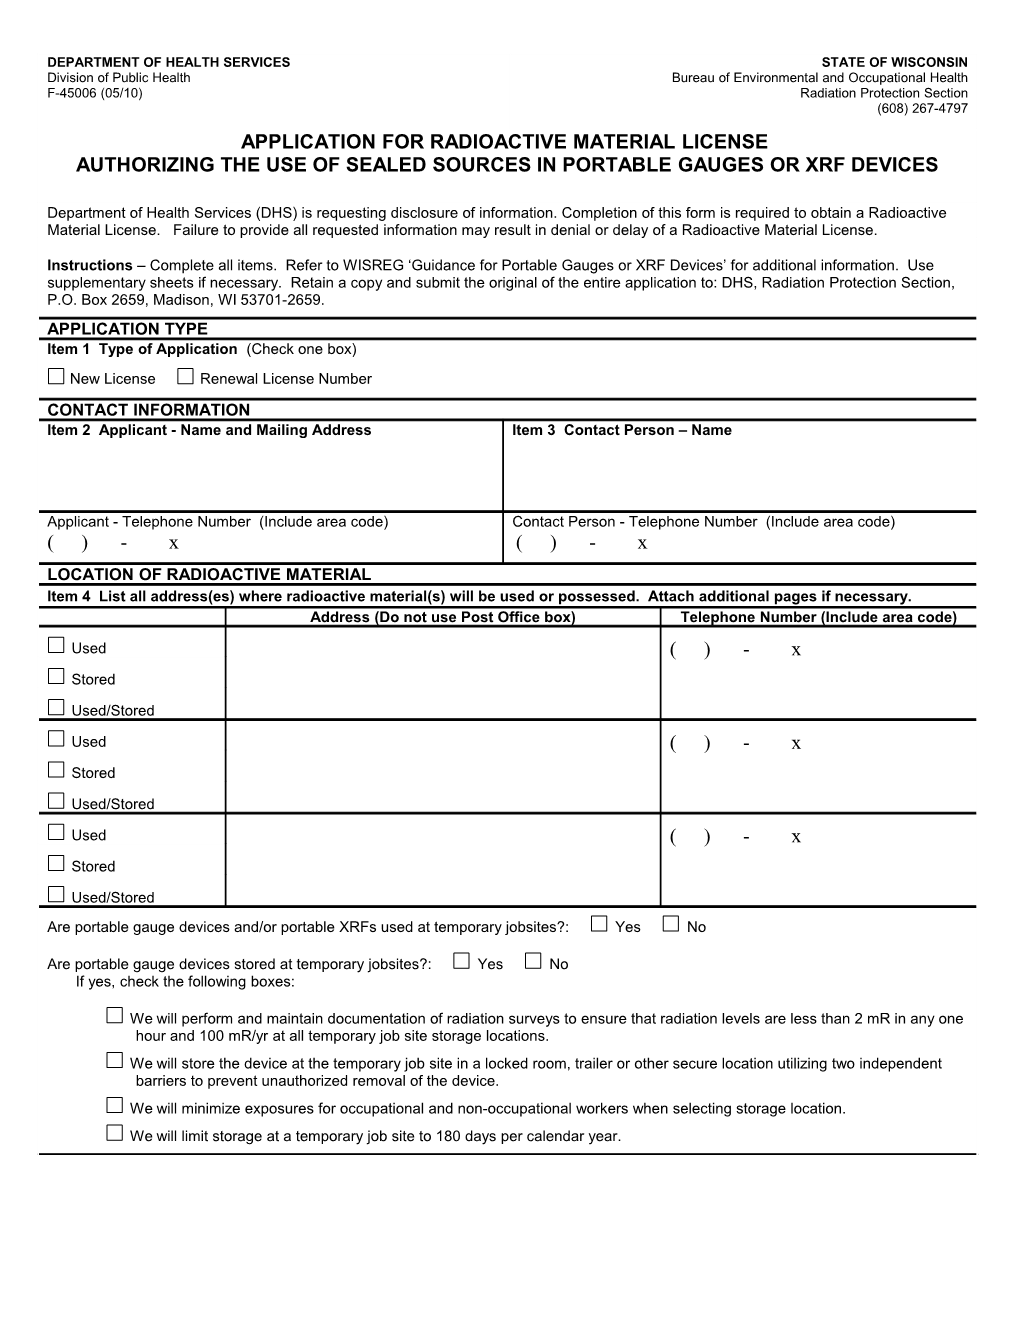 Application for Radioactive Material License Authorizing the Use of Sealed Sources in Portable